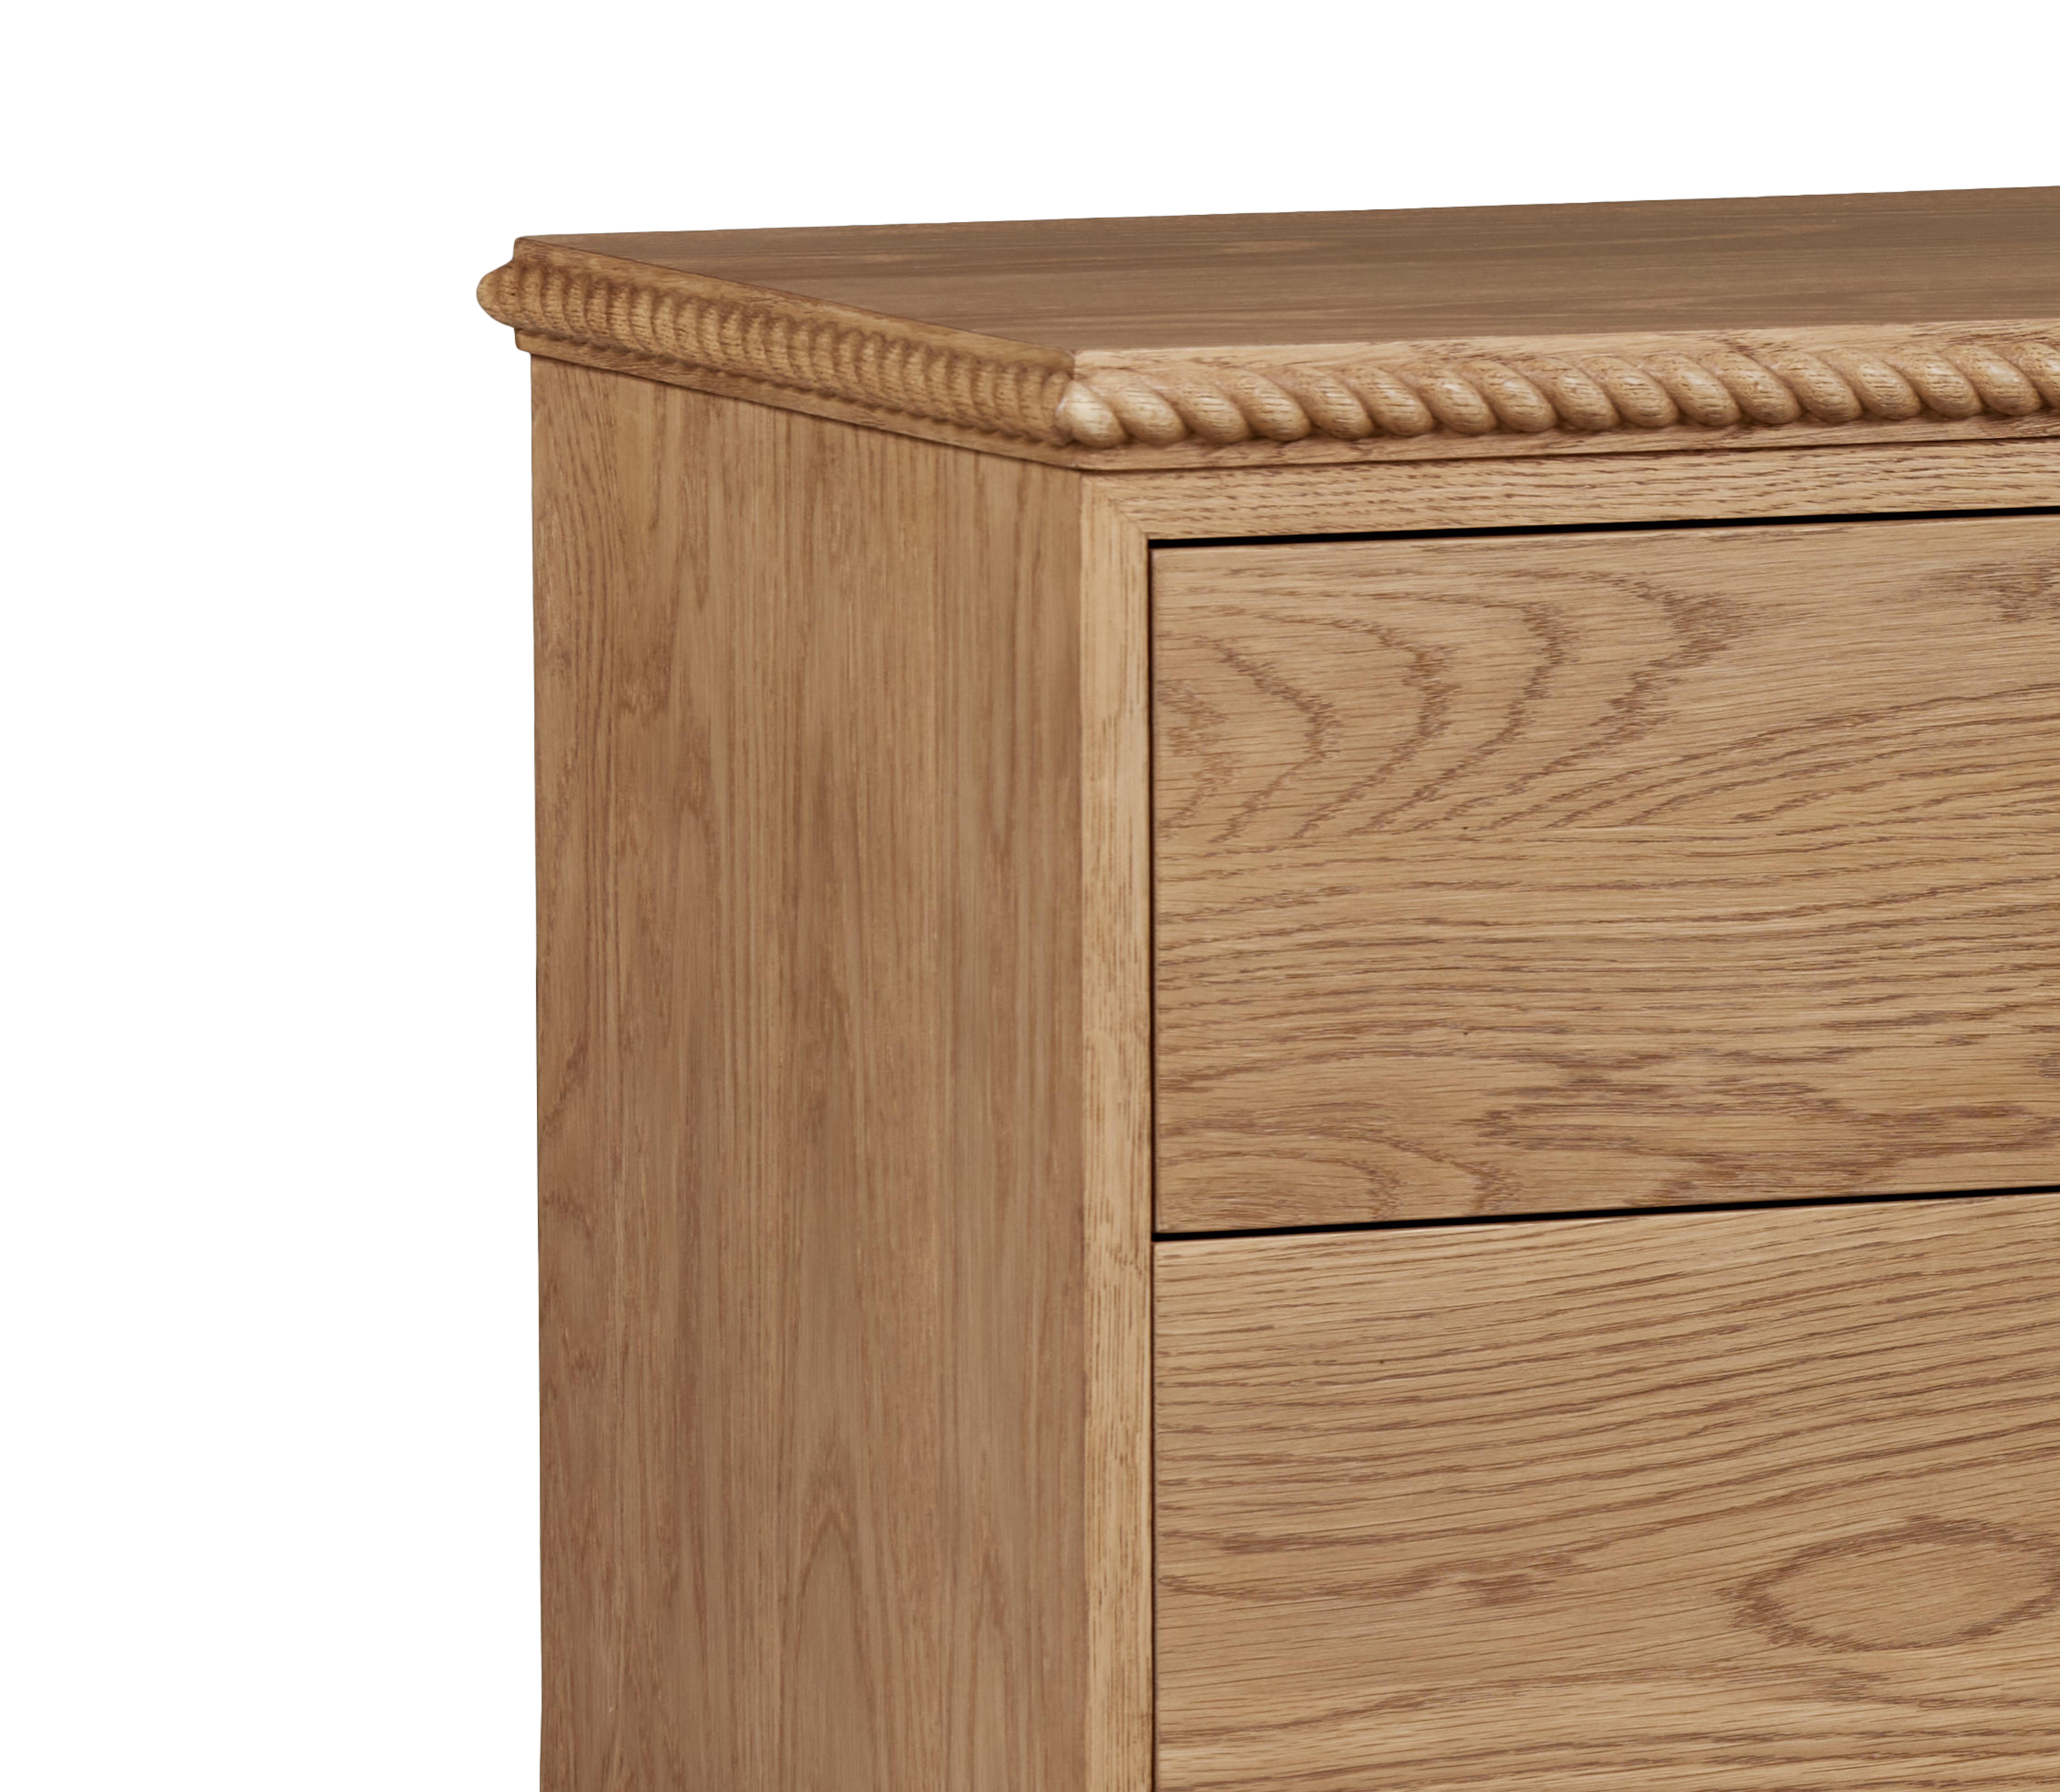 Pair of Rey Bedside Tables, in Summer Aged Oak, by August Abode In New Condition For Sale In Beverly Hills, CA